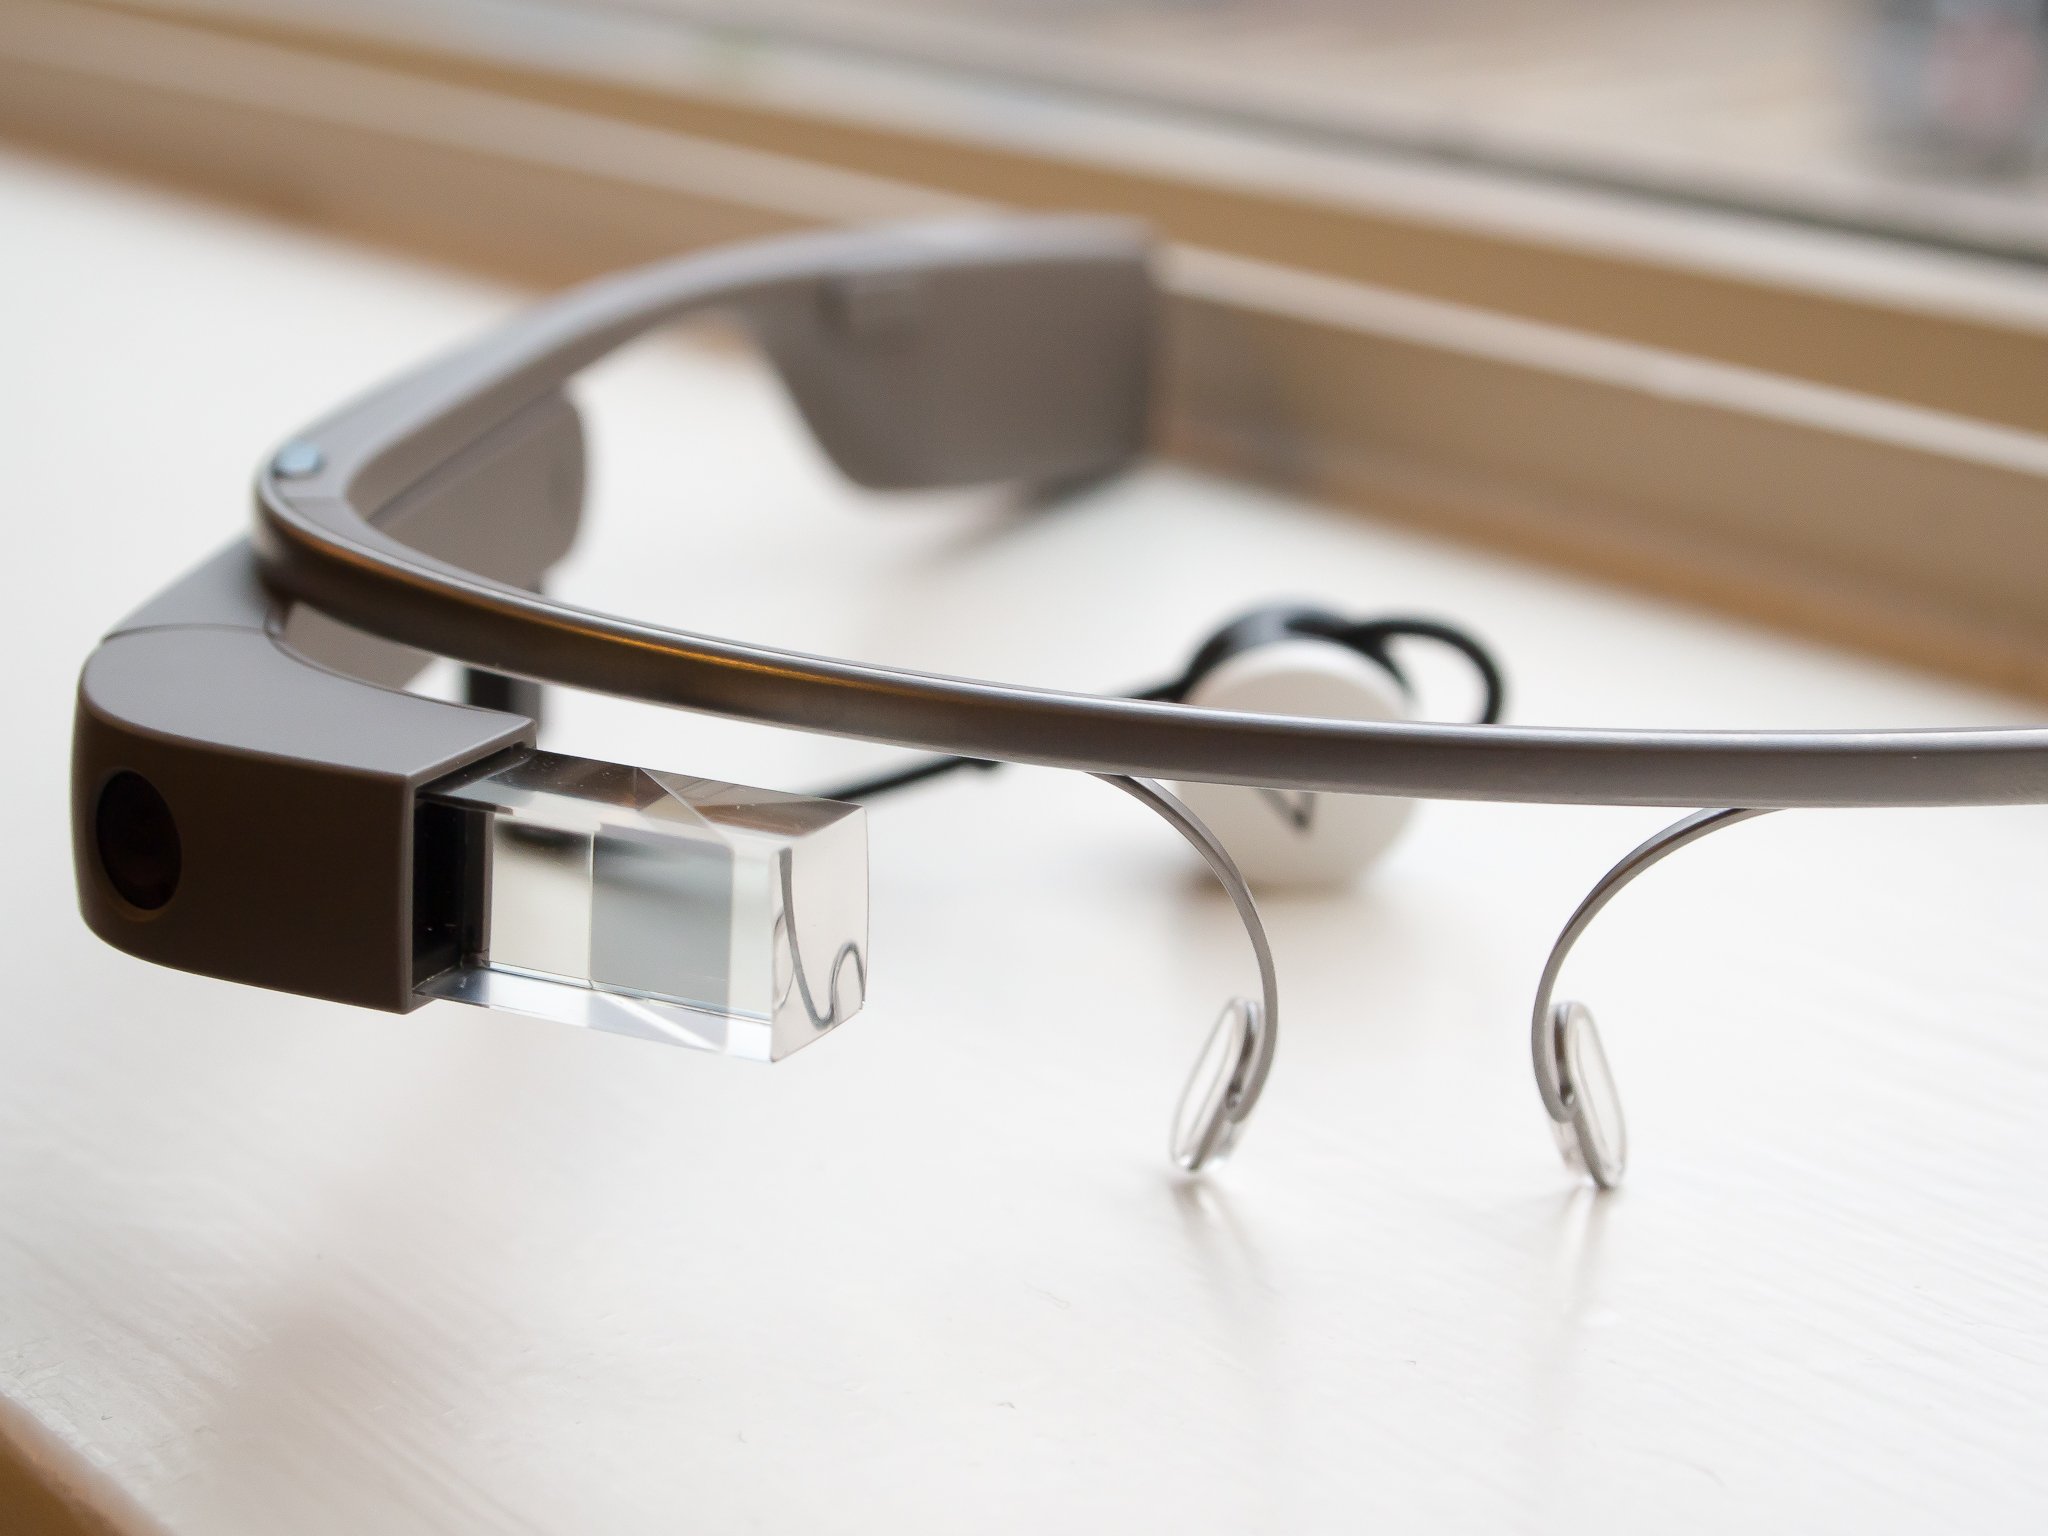 The next version of Google Glass might have Intel Inside